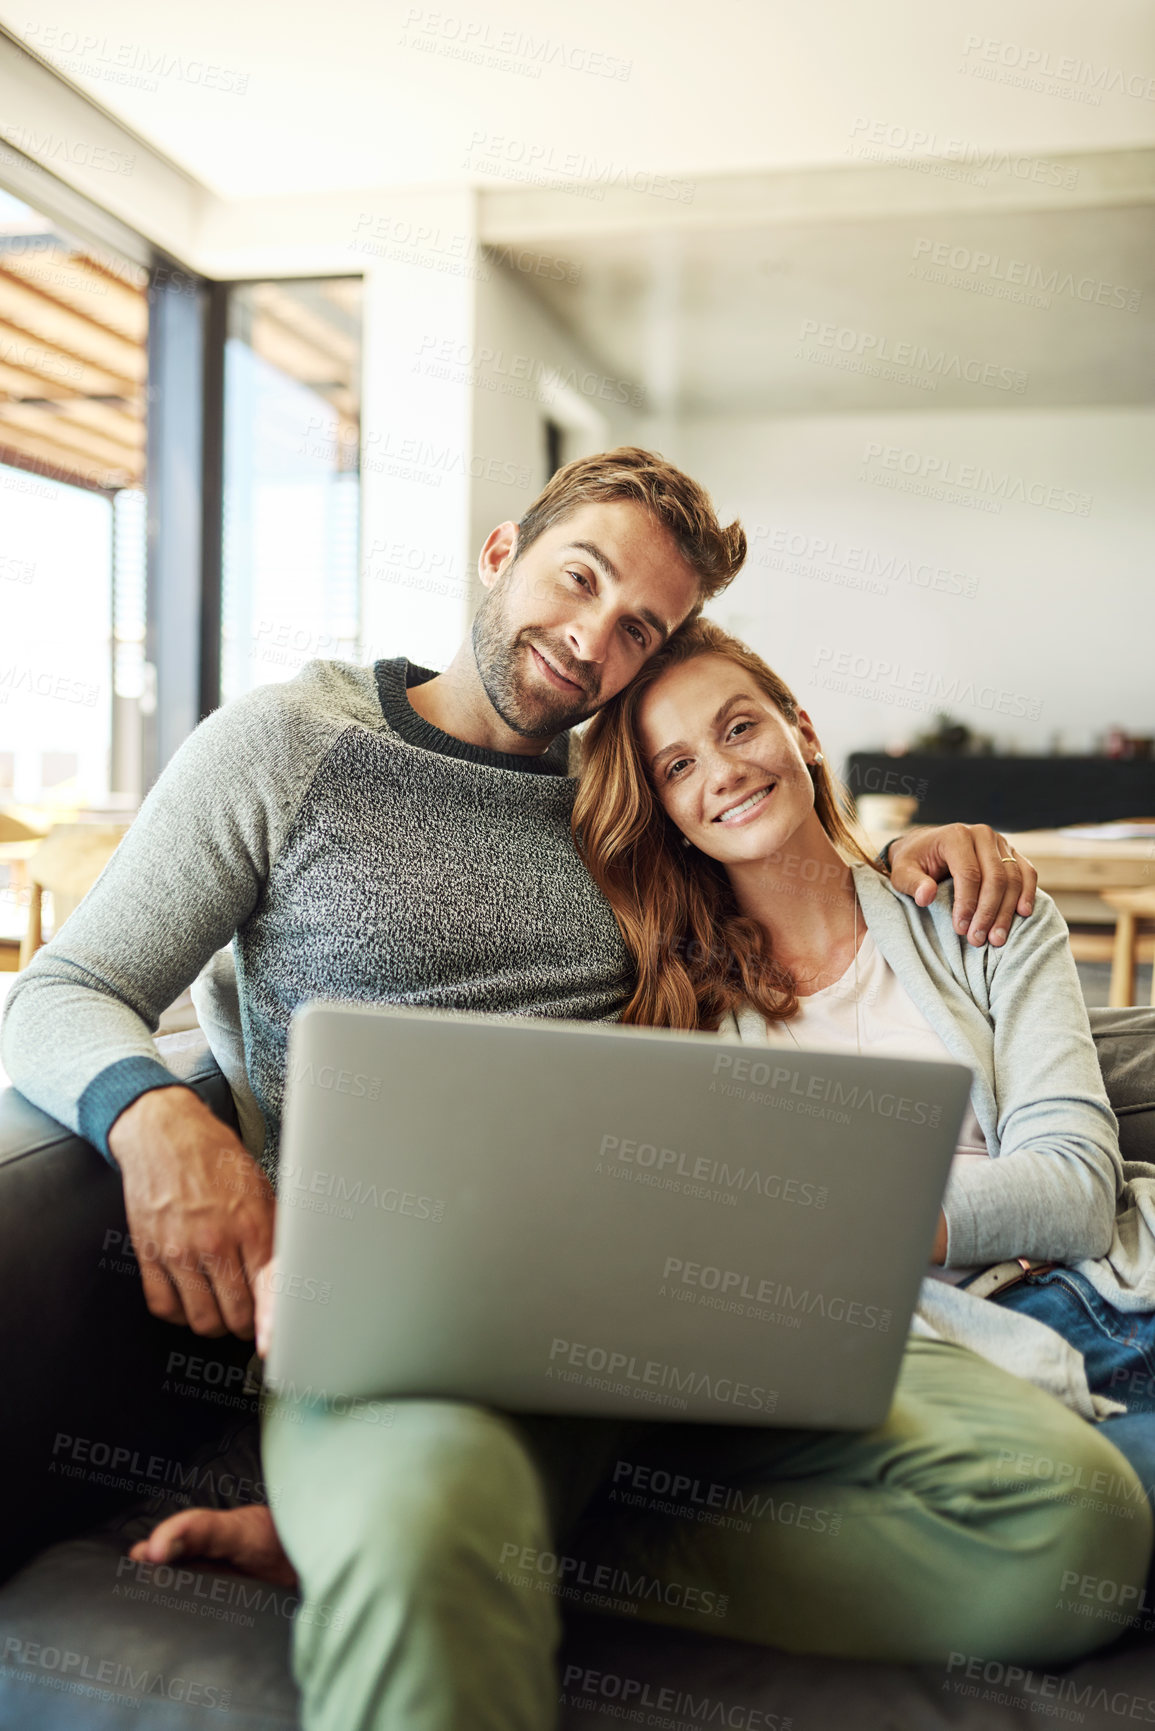 Buy stock photo Cropped portrait of an affectionate young couple using a laptop while relaxing on their sofa at home